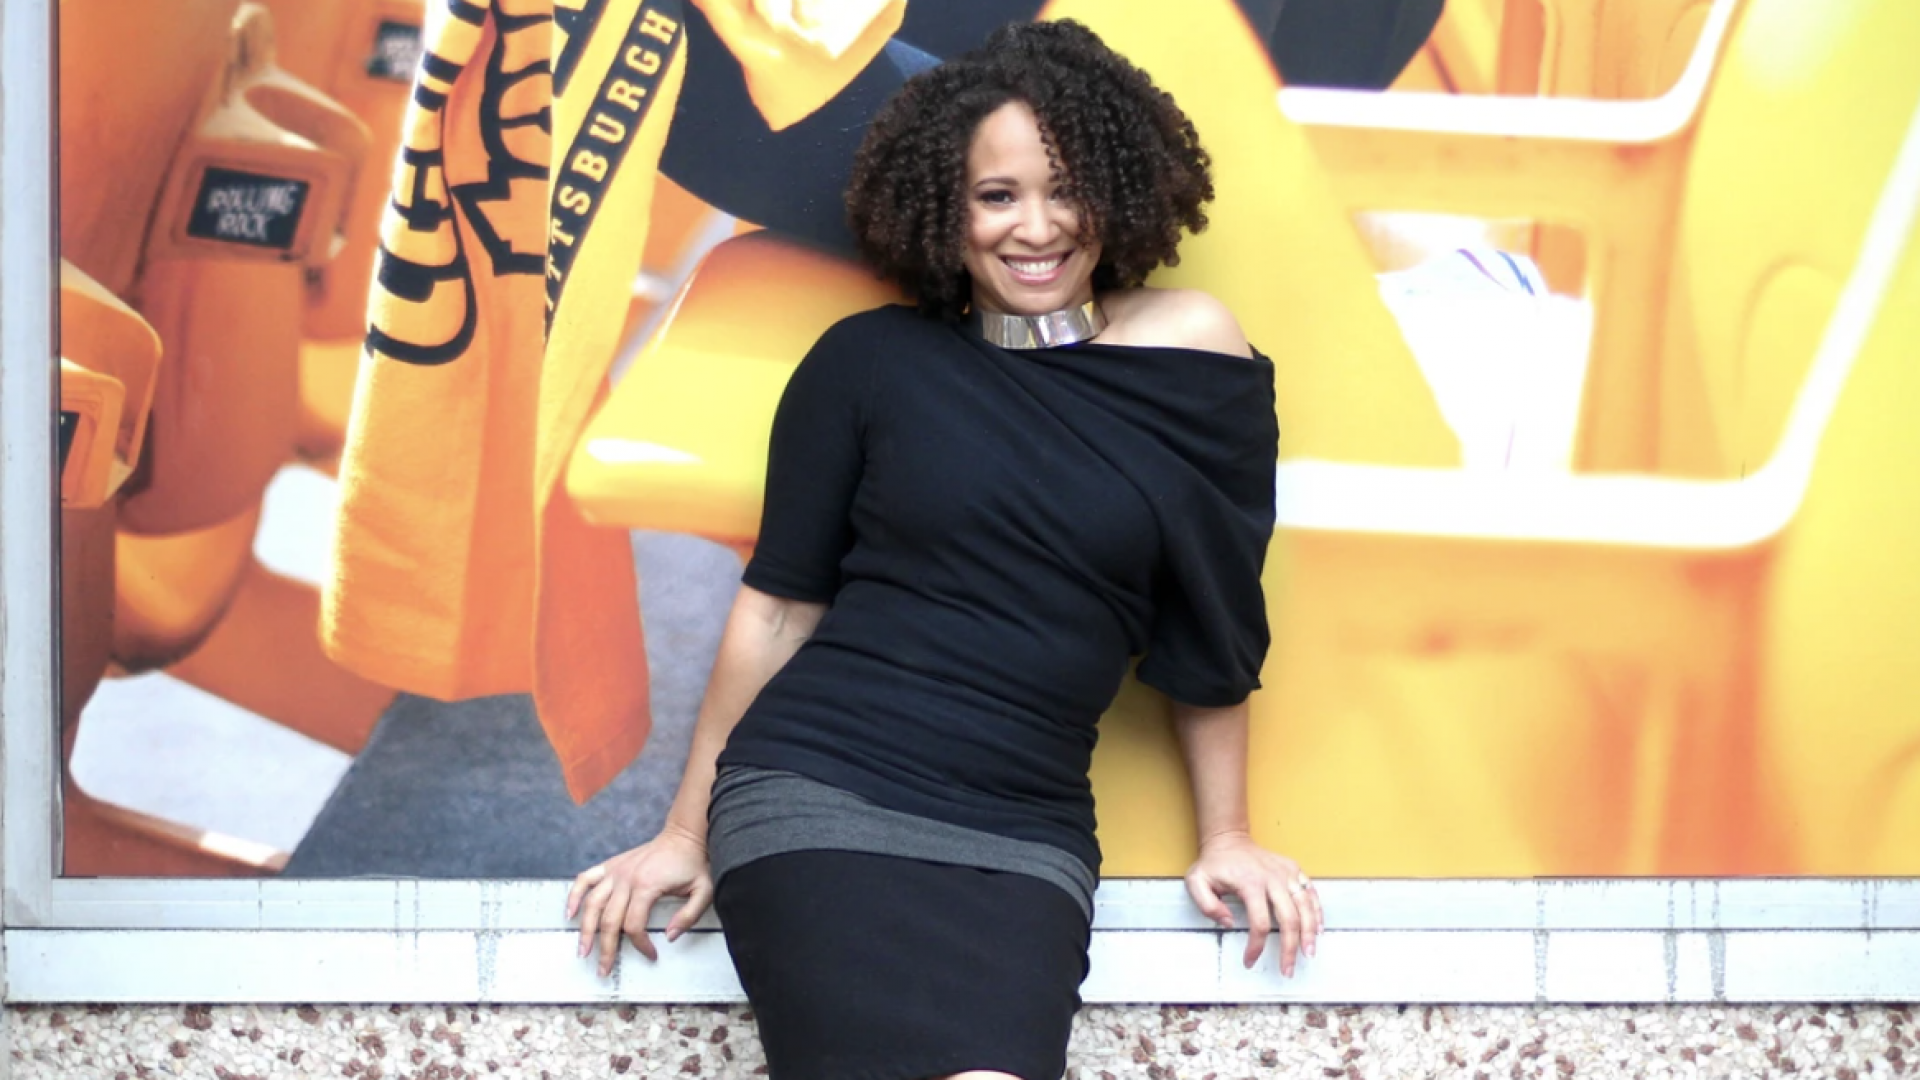 Kiya Tomlin Is Designing Clothes For The Everyday Woman